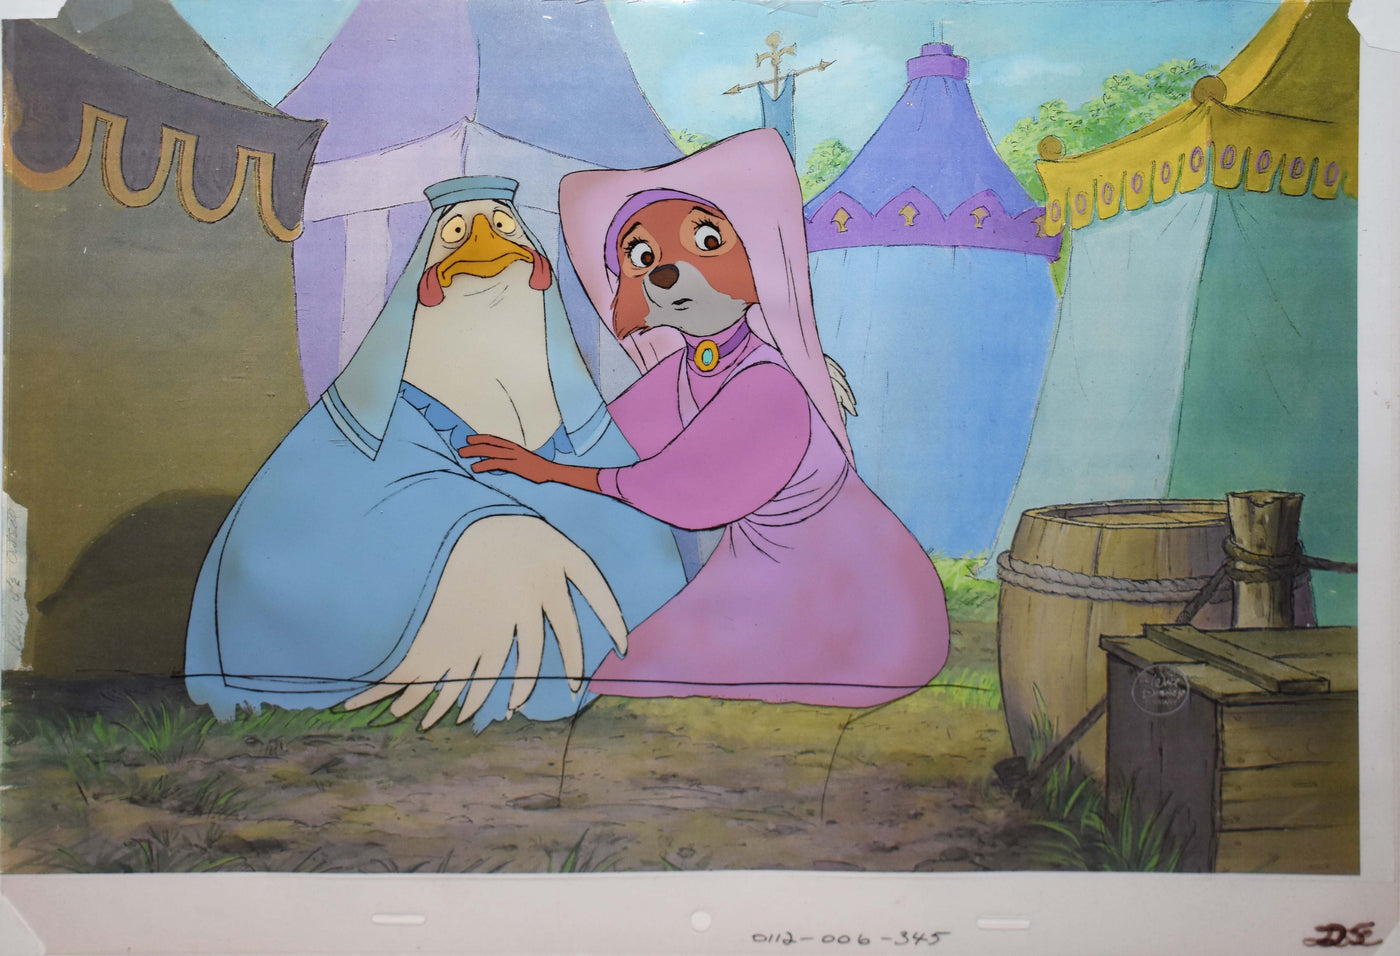 Original Disney Production Cel from Robin Hood featuring Lady Kluck and Maid Marian